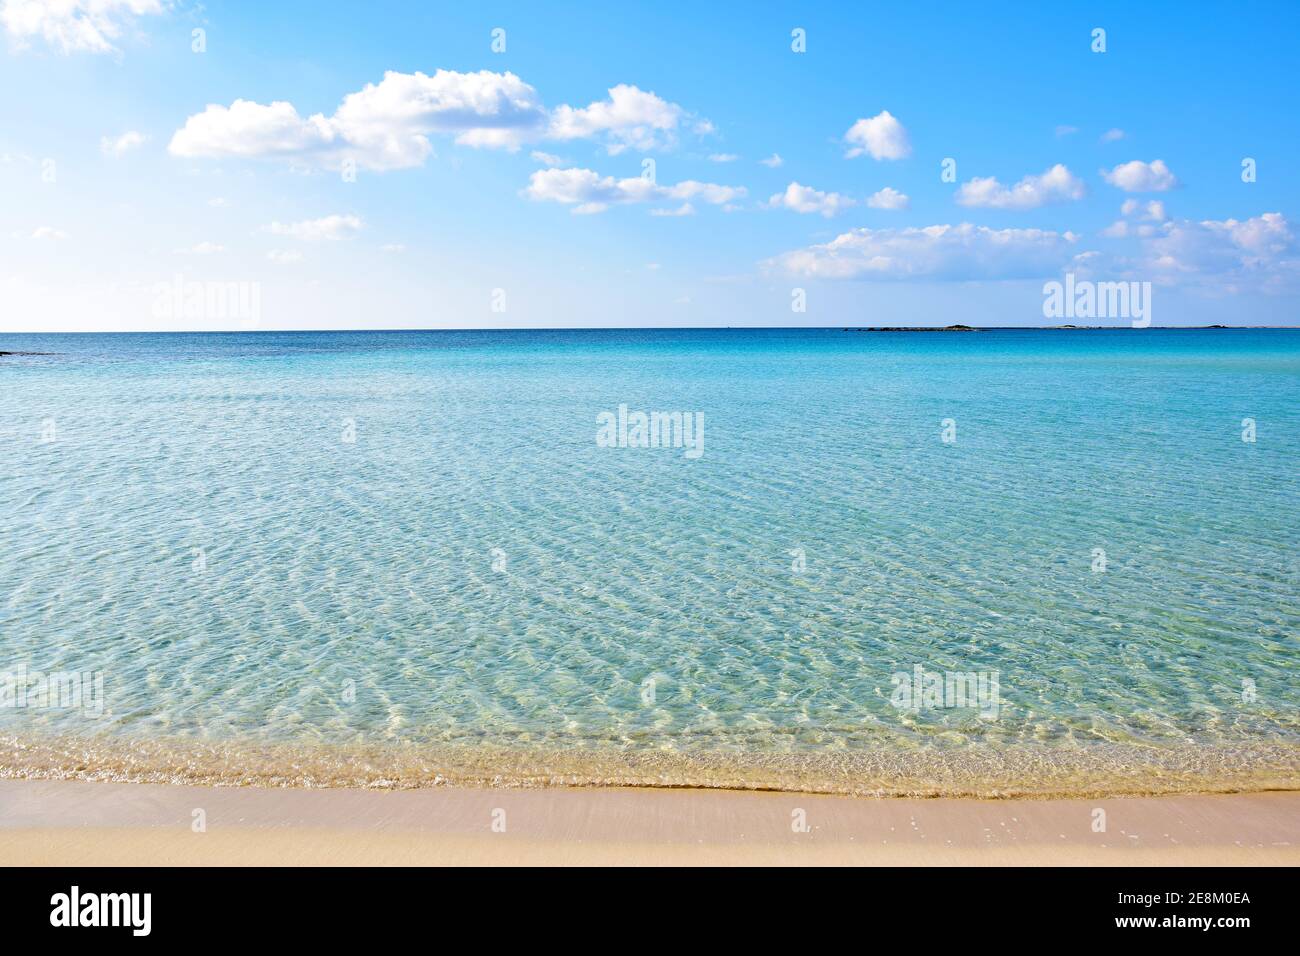 Crystalline water in a beach in Salento, Italy Stock Photo